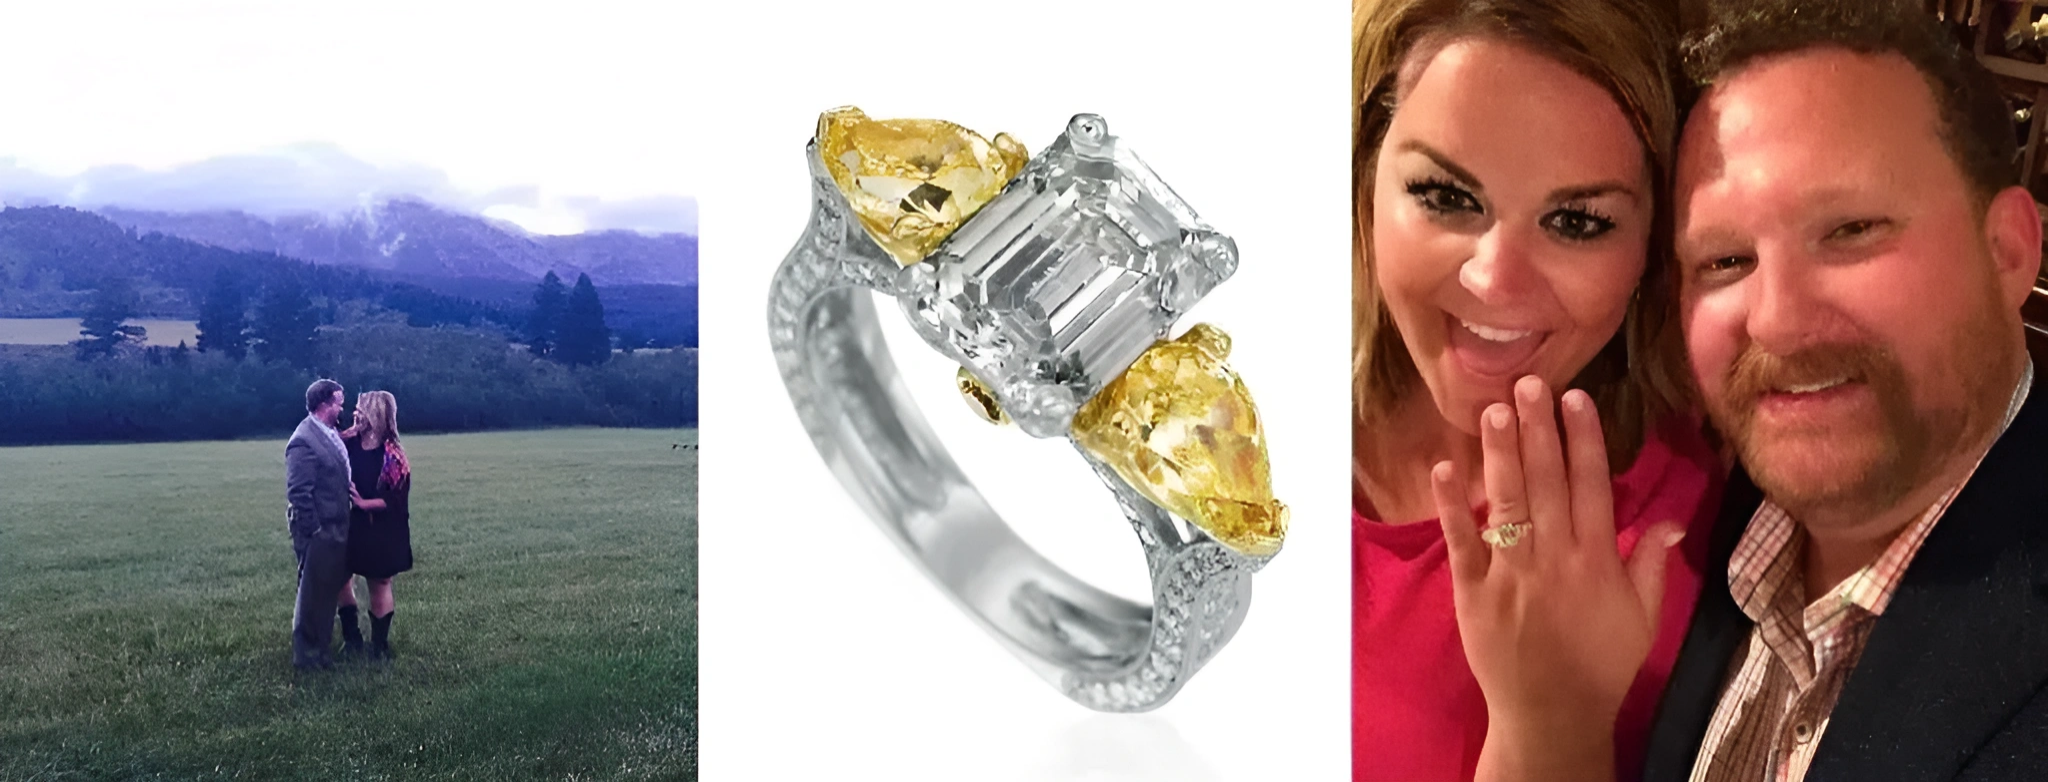 collage of a happily married couple posing in an open field, posing with the ring, and the ring itself, a silver ring with gold on the sides